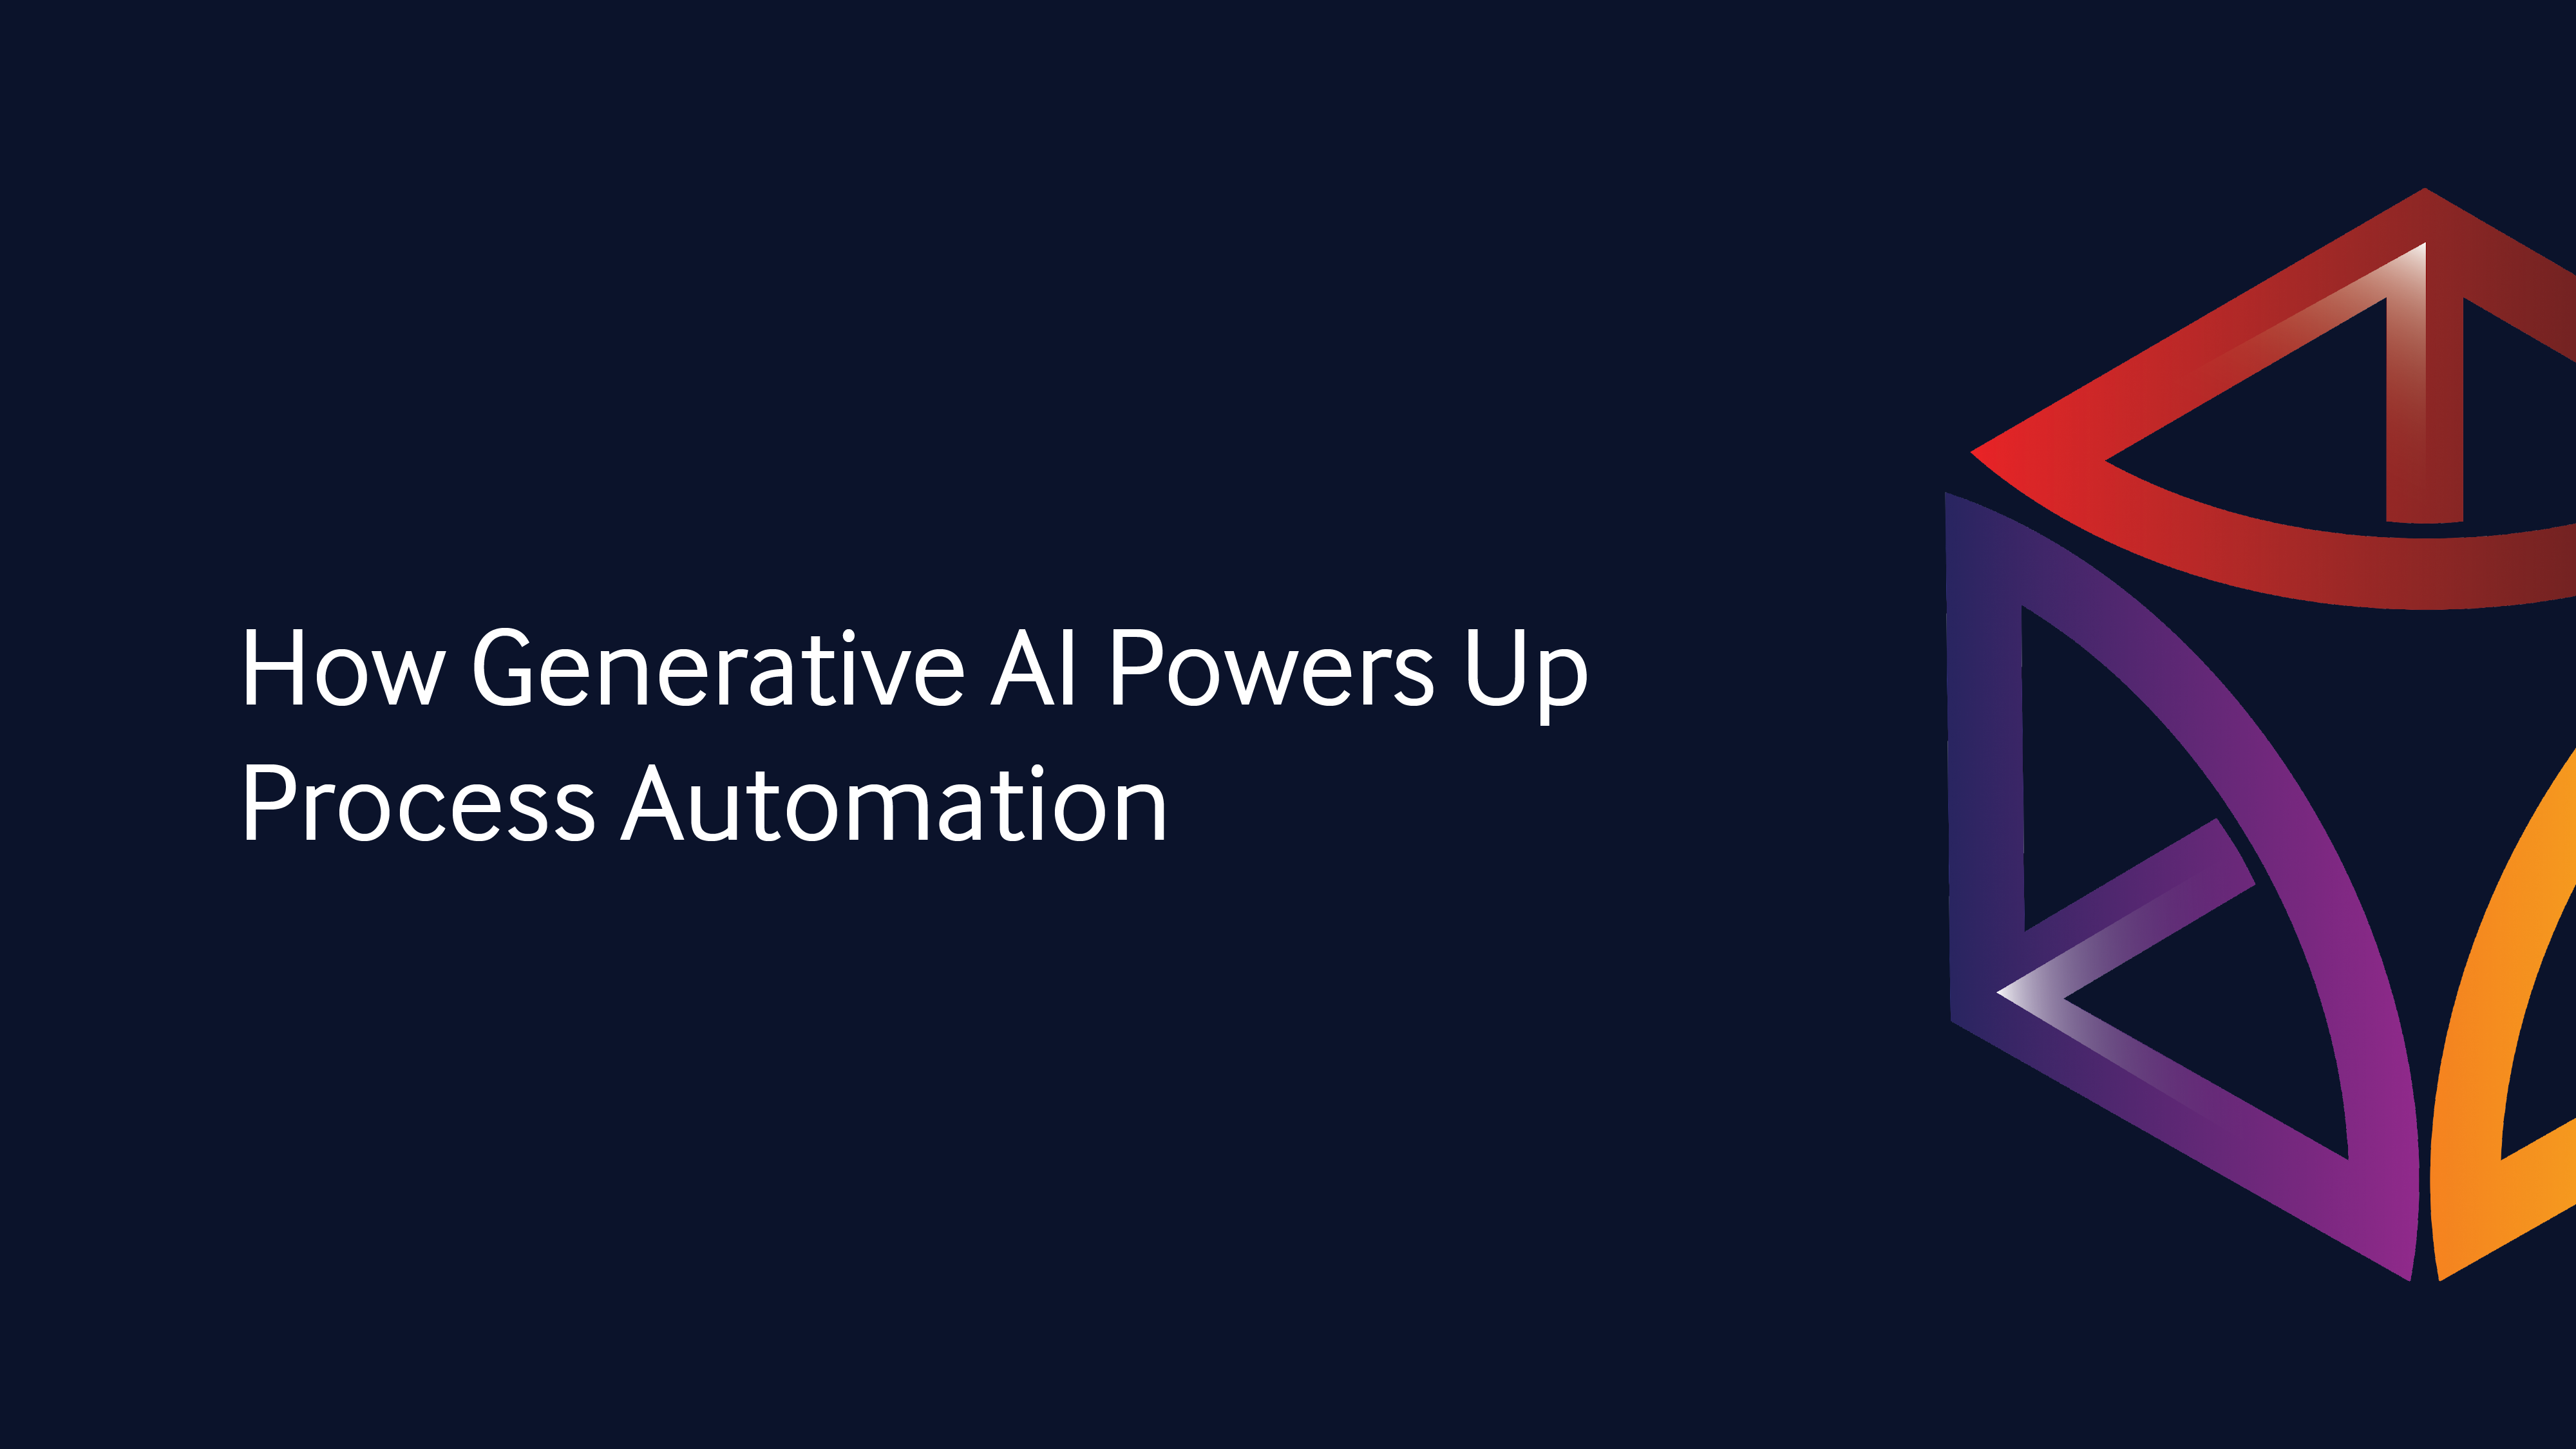 How Generative AI Powers up Process Automation